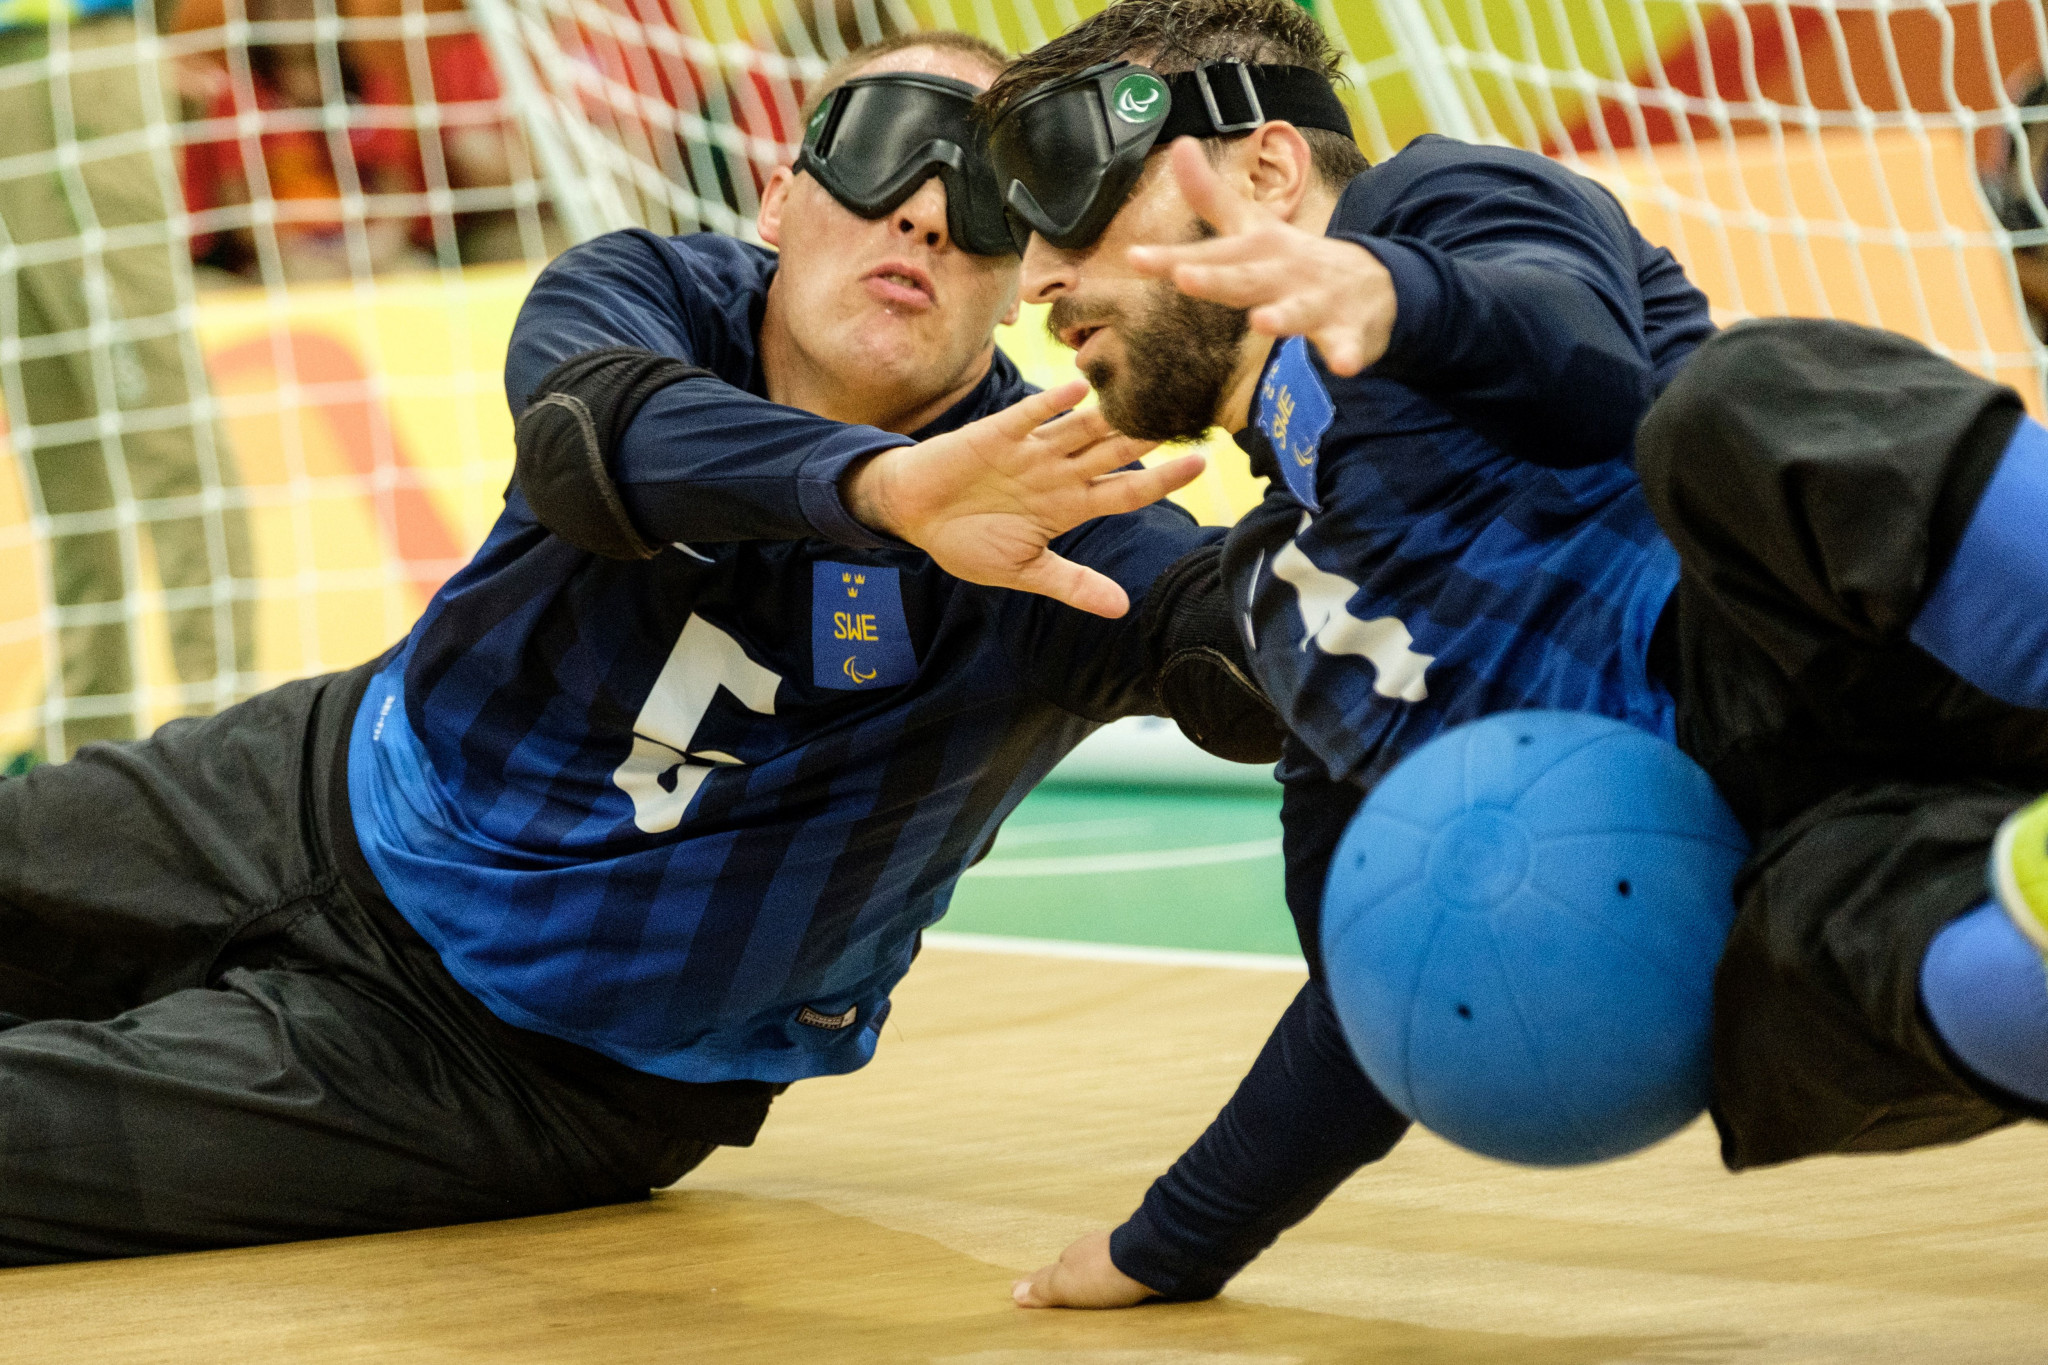 IBSA to host Tokyo 2020 Paralympic goalball and judo qualifiers in Fort Wayne